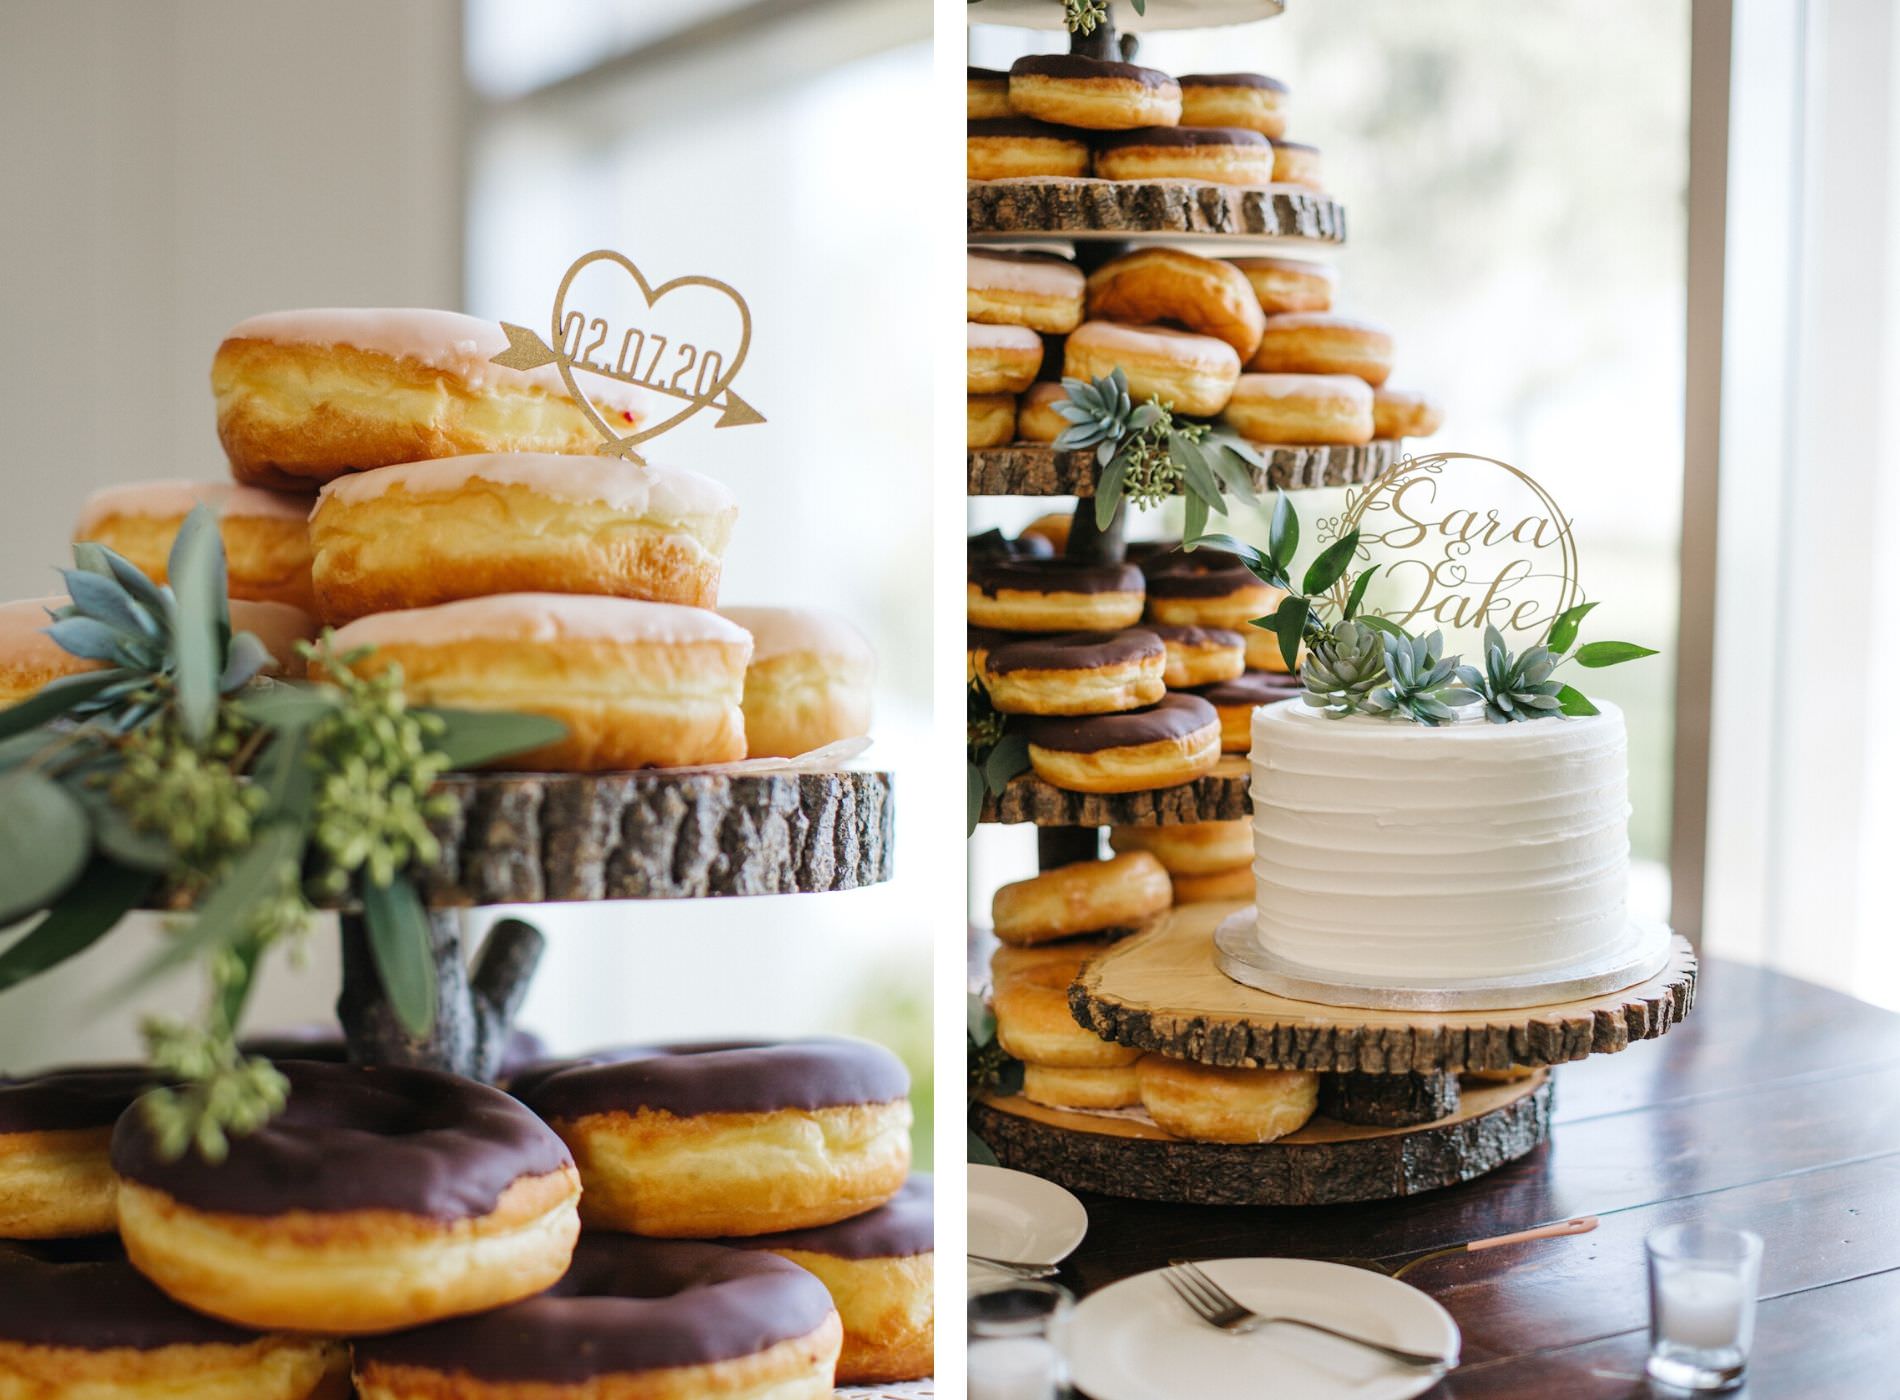 Unique Wedding Cake Table with Wood Stump Cake Stand and Donut Tower accented with Eucalyptus Greenery and Small One Tier Wedding Cake with Buttercream Icing topped with Succulents and Gold Die Cut Topper